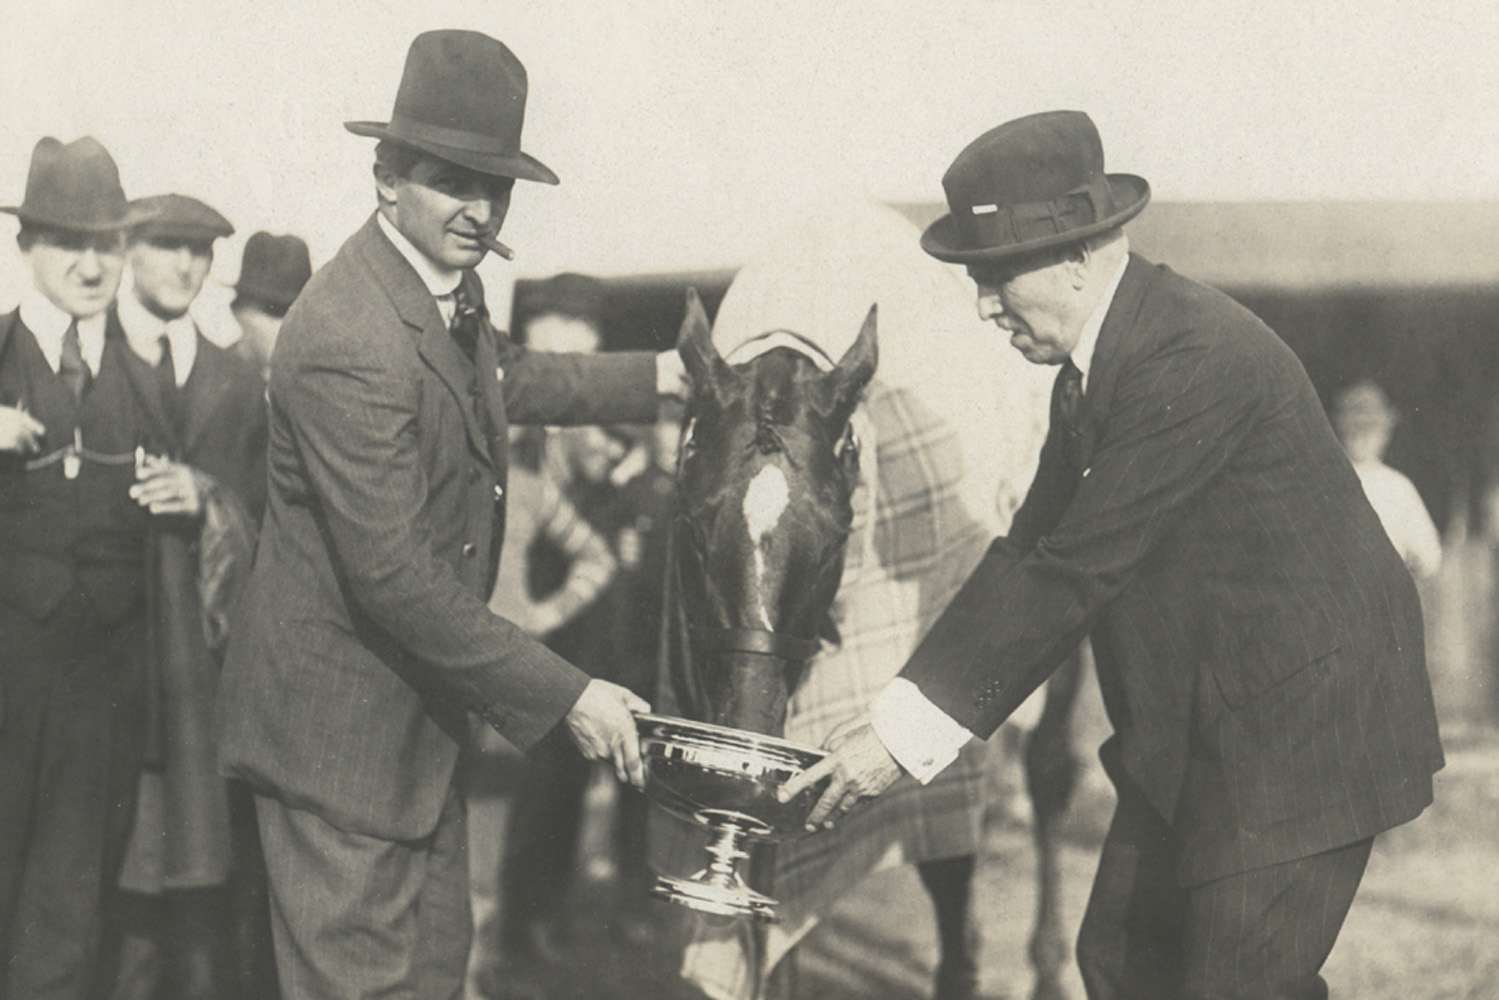 Man o' War celebrates winning his final career race with trainer Louis Feustel and owner Samuel Riddle by drinking from the Kenilworth Gold Cup trophy after defeating Sir Barton (Museum Collection)